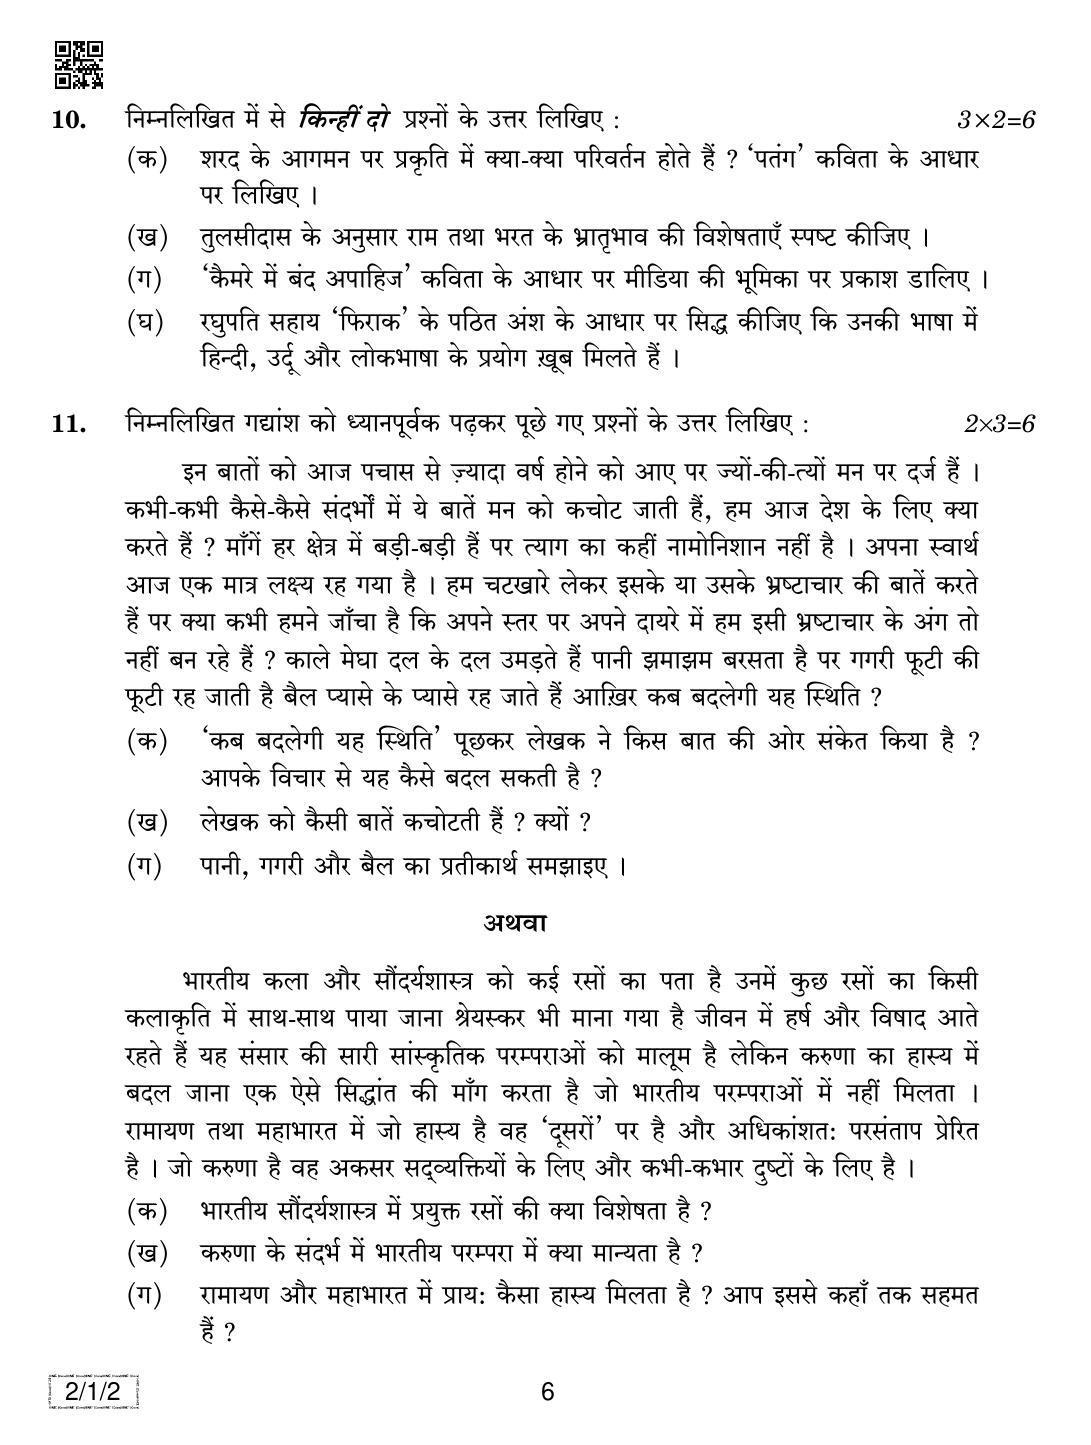 CBSE Class 12 2-1-2 HINDI CORE 2019 Compartment Question Paper - Page 6